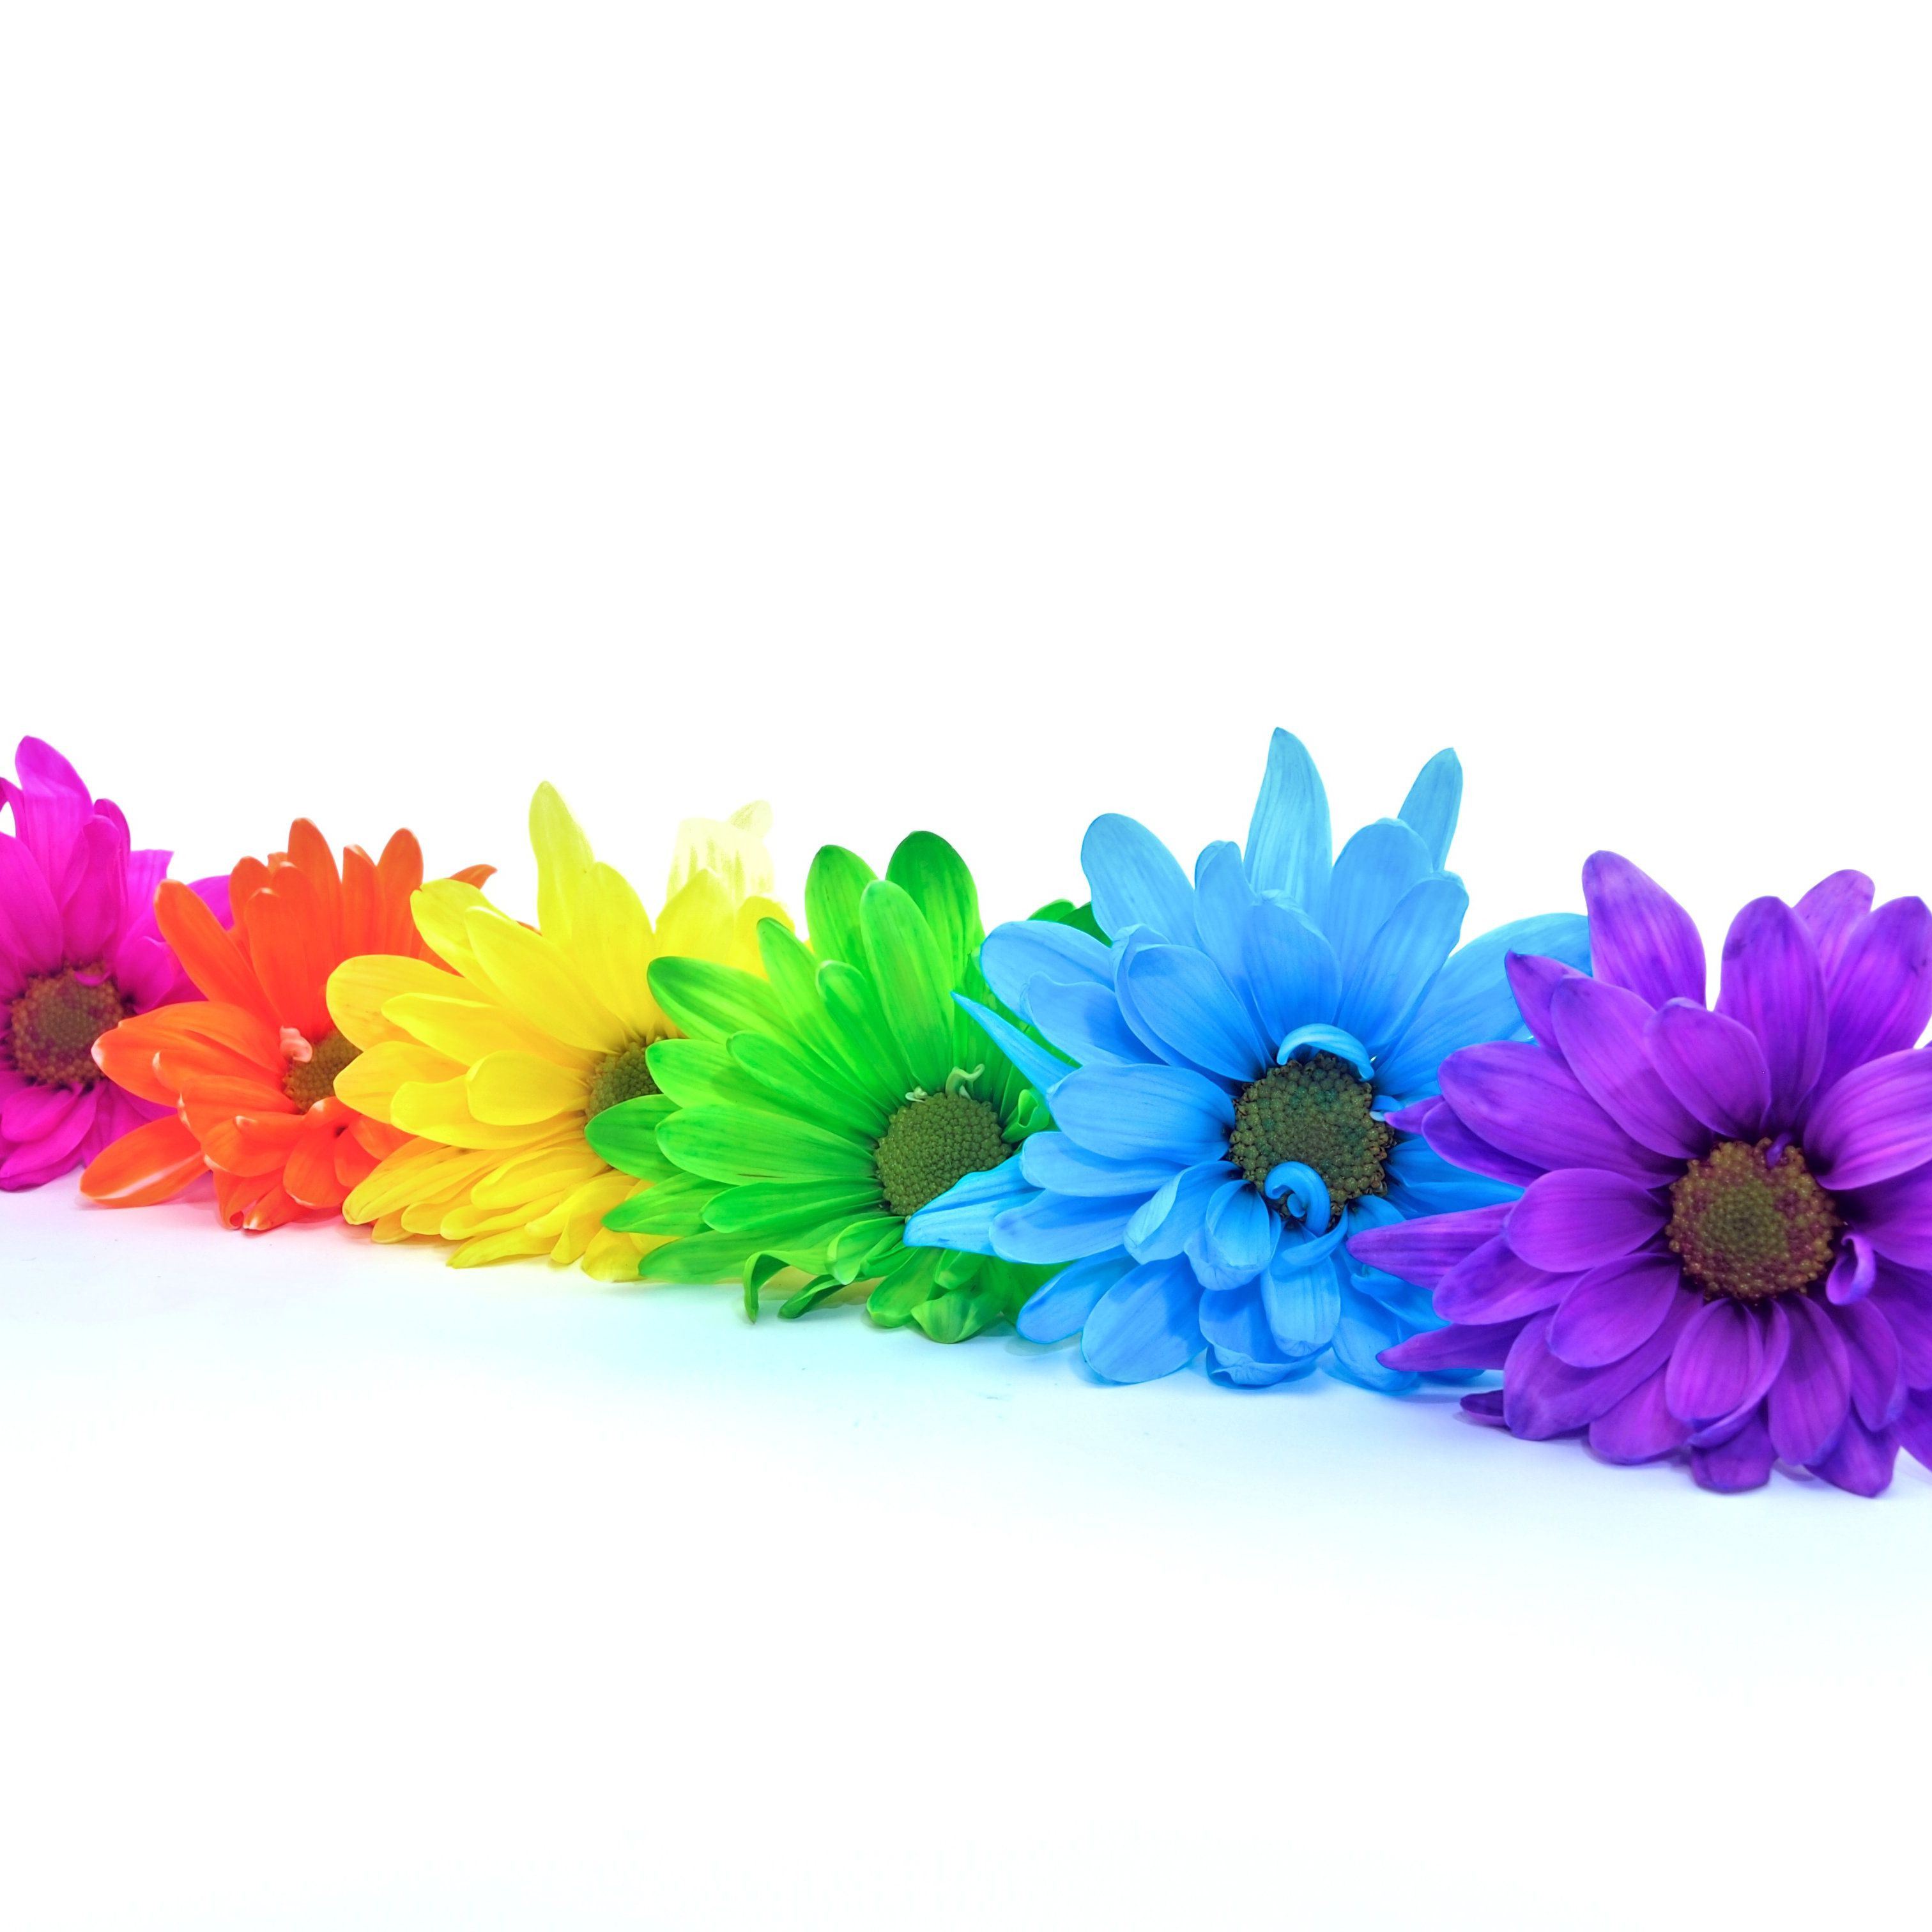 How To Make Colored Flowers